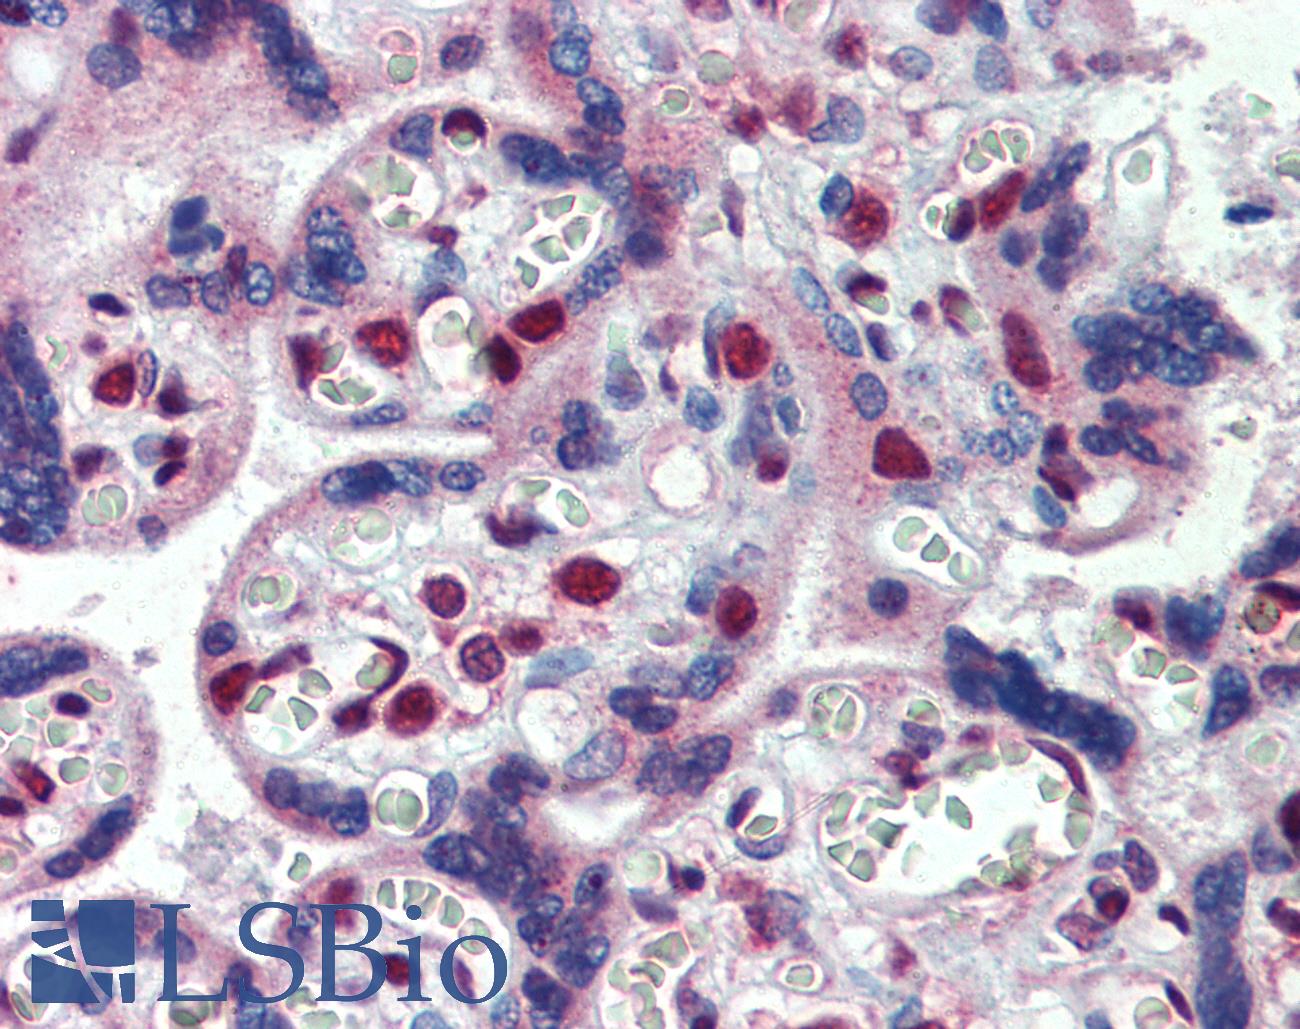 FMR1 / FMRP Antibody - Anti-FMR1 antibody IHC of human placenta. Immunohistochemistry of formalin-fixed, paraffin-embedded tissue after heat-induced antigen retrieval. Antibody concentration 2.5 ug/ml.